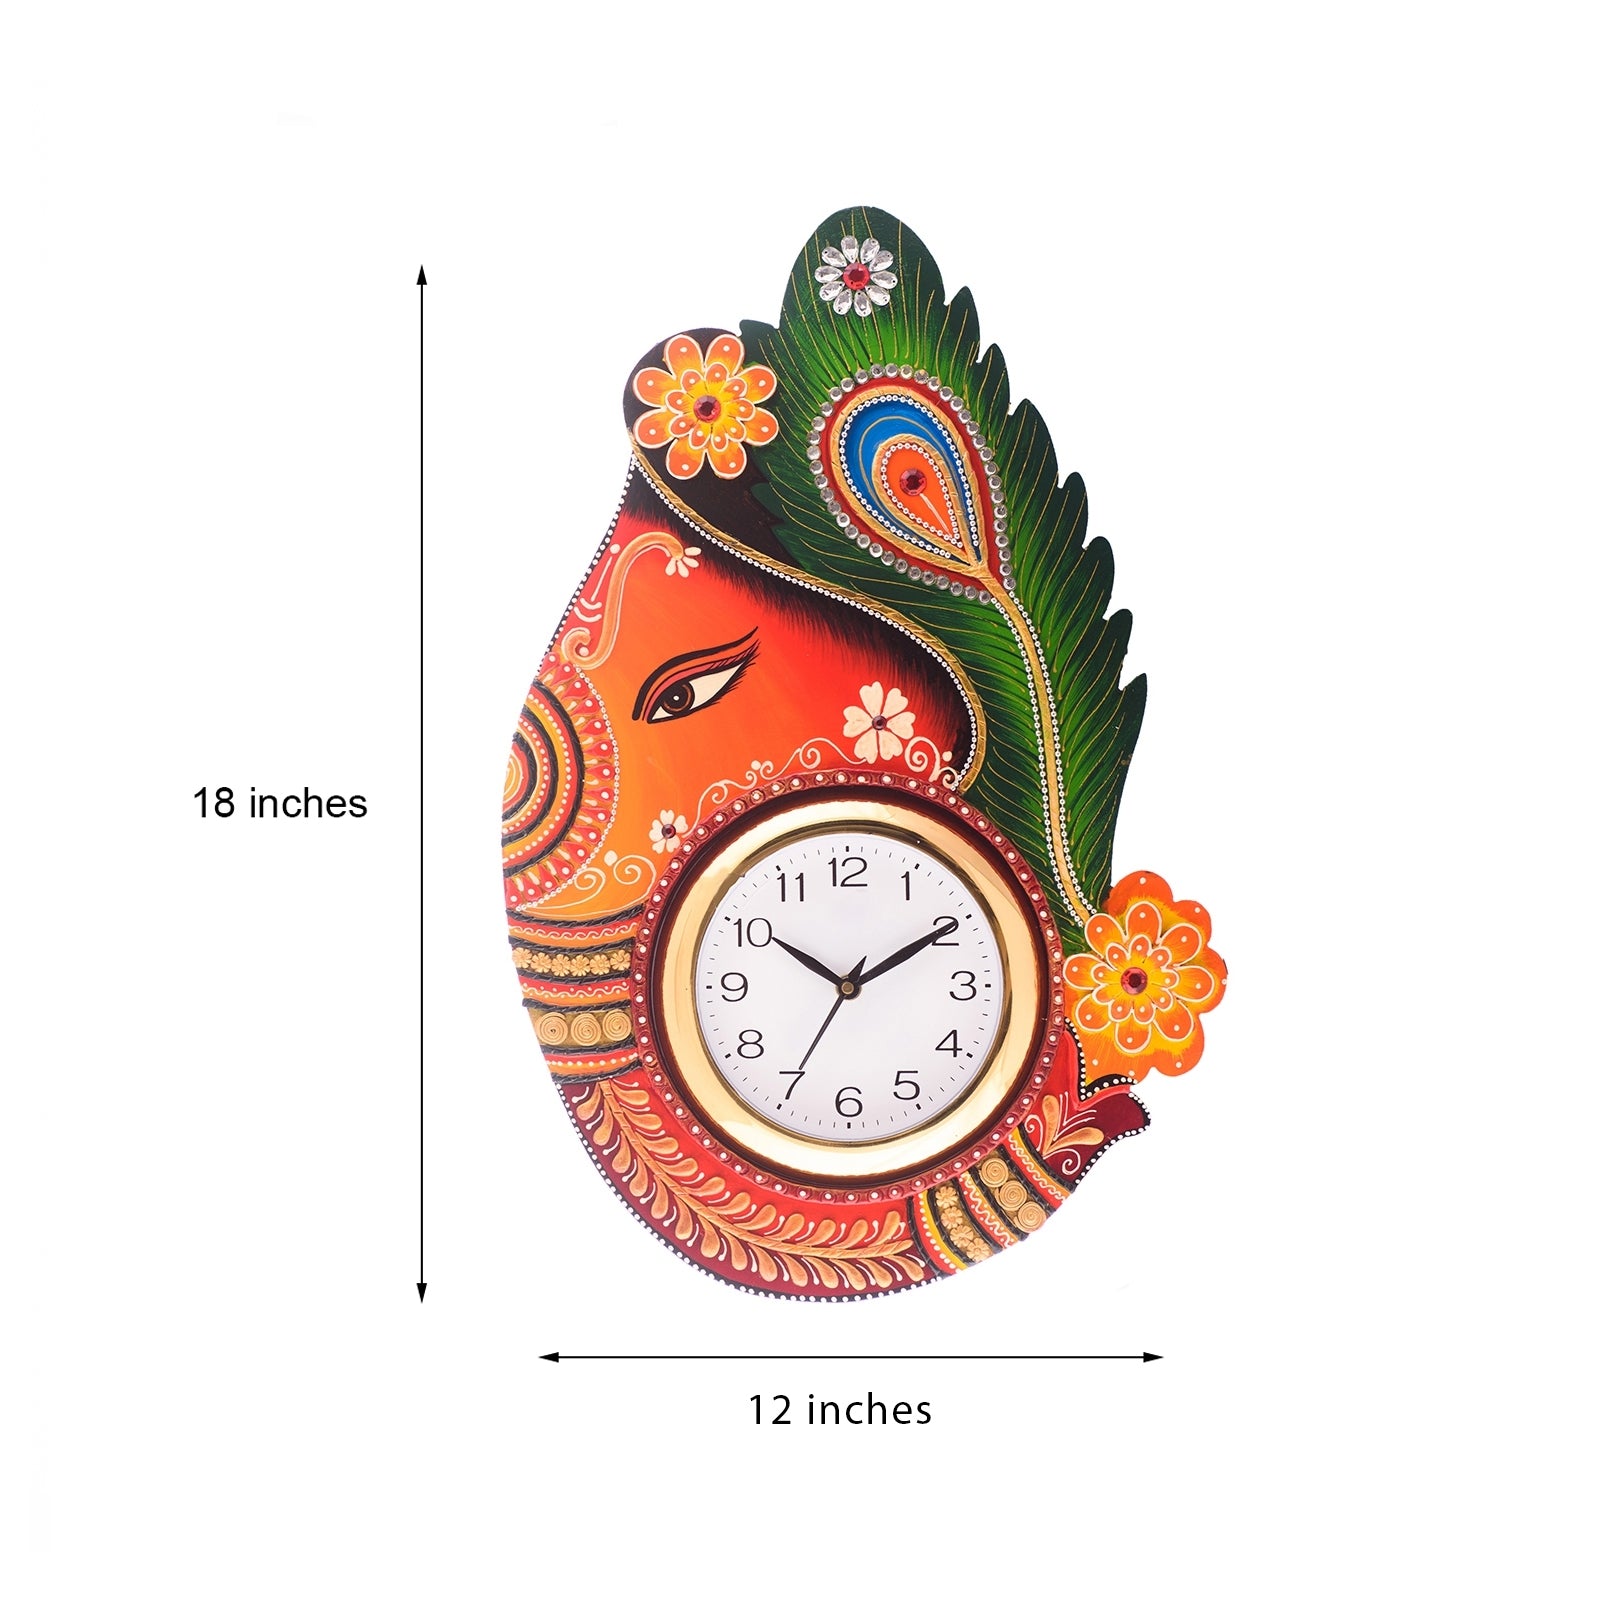 Colorful Handicrafted Paper Mache Wooden Turban Lord Ganesha Wall Clock 2